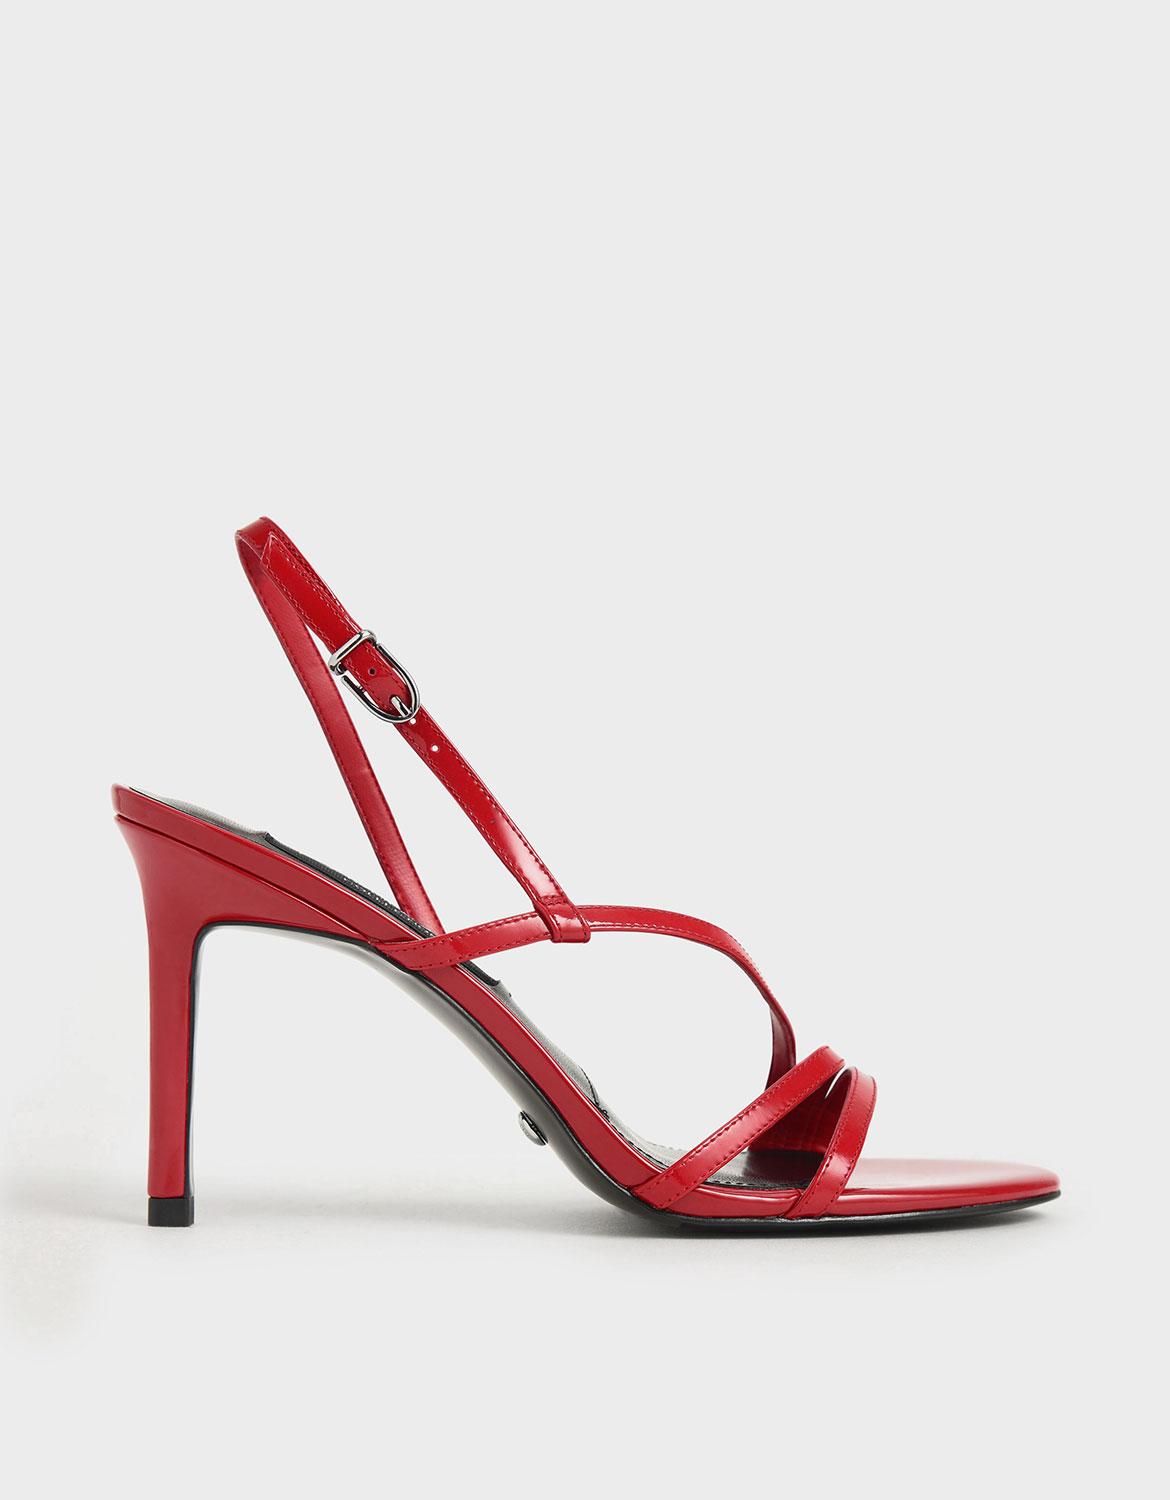 Charles & Keith Patent Leather Strappy Heeled Sandals in Red - Lyst